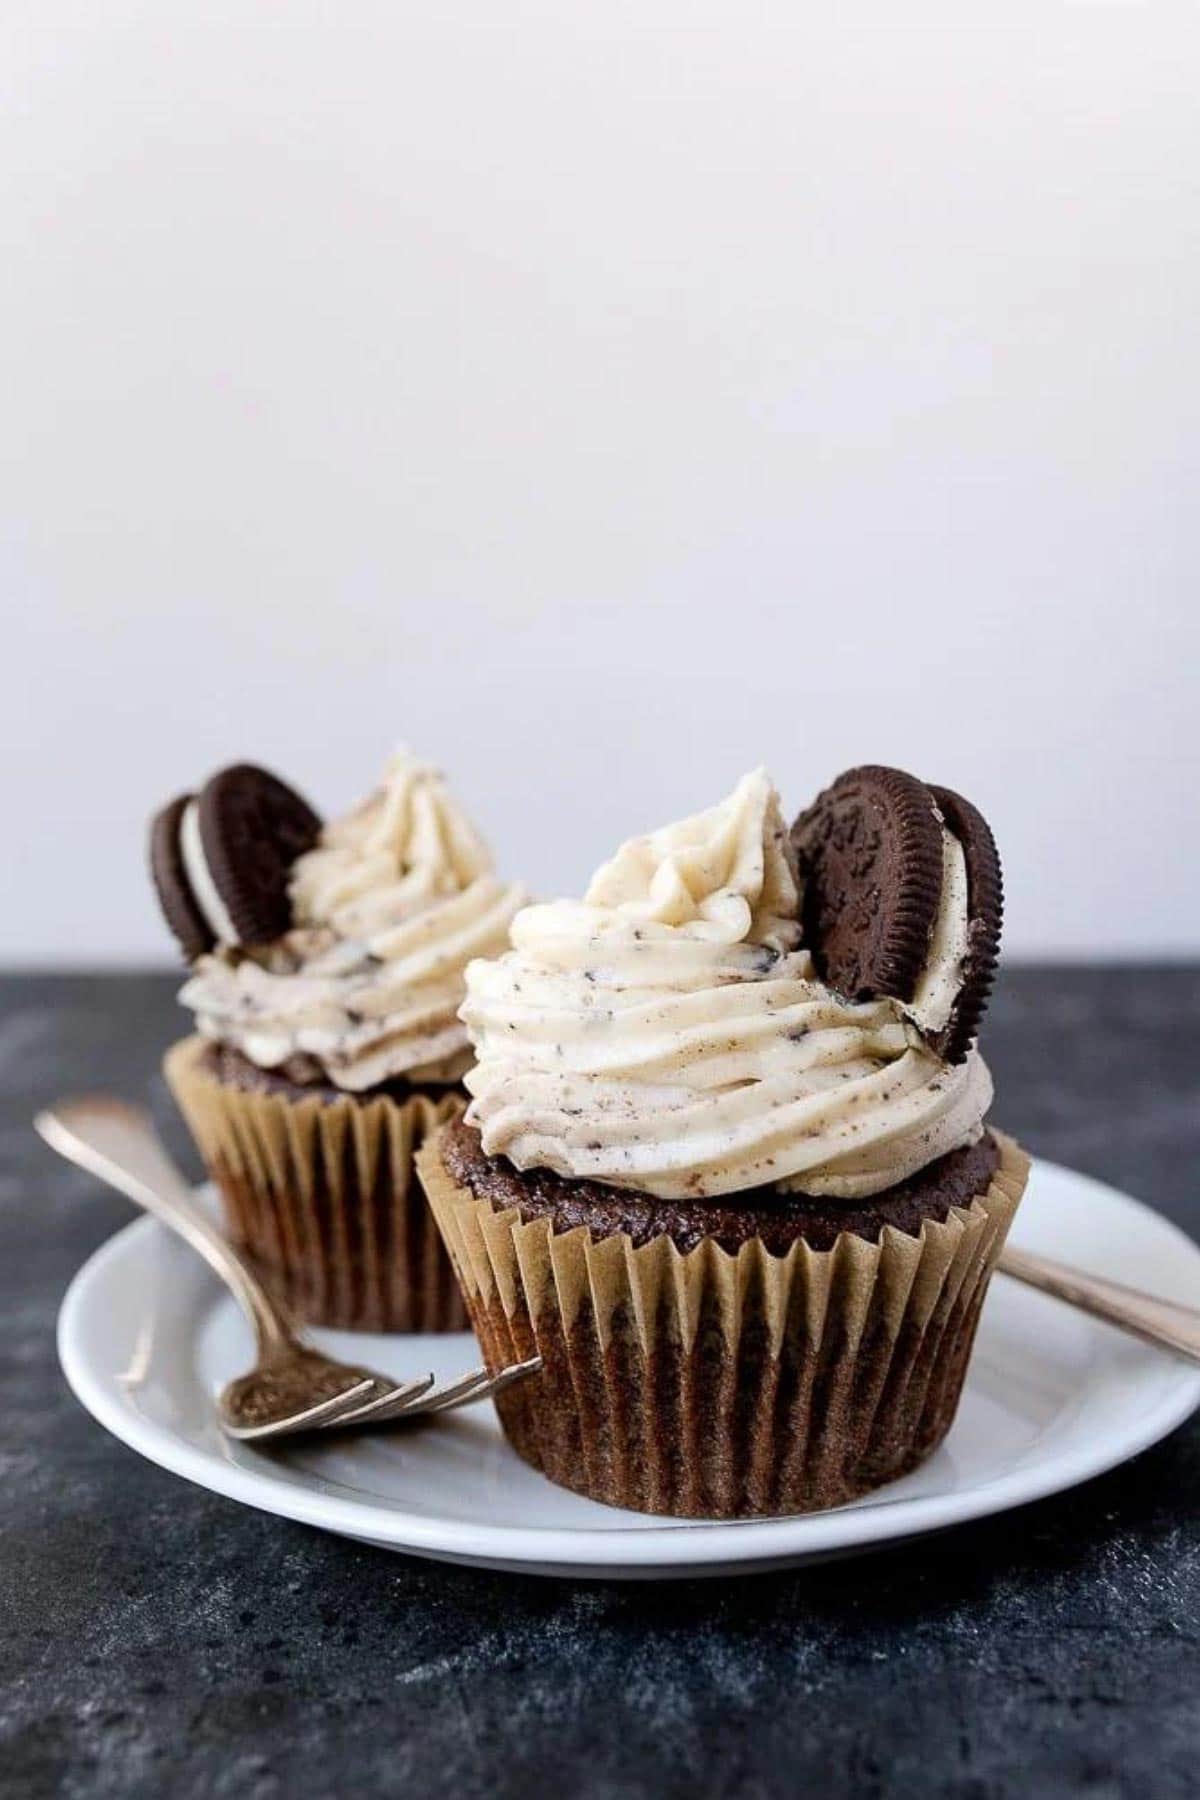 Two chocolate cupcakes with white icing and a cookie on top.